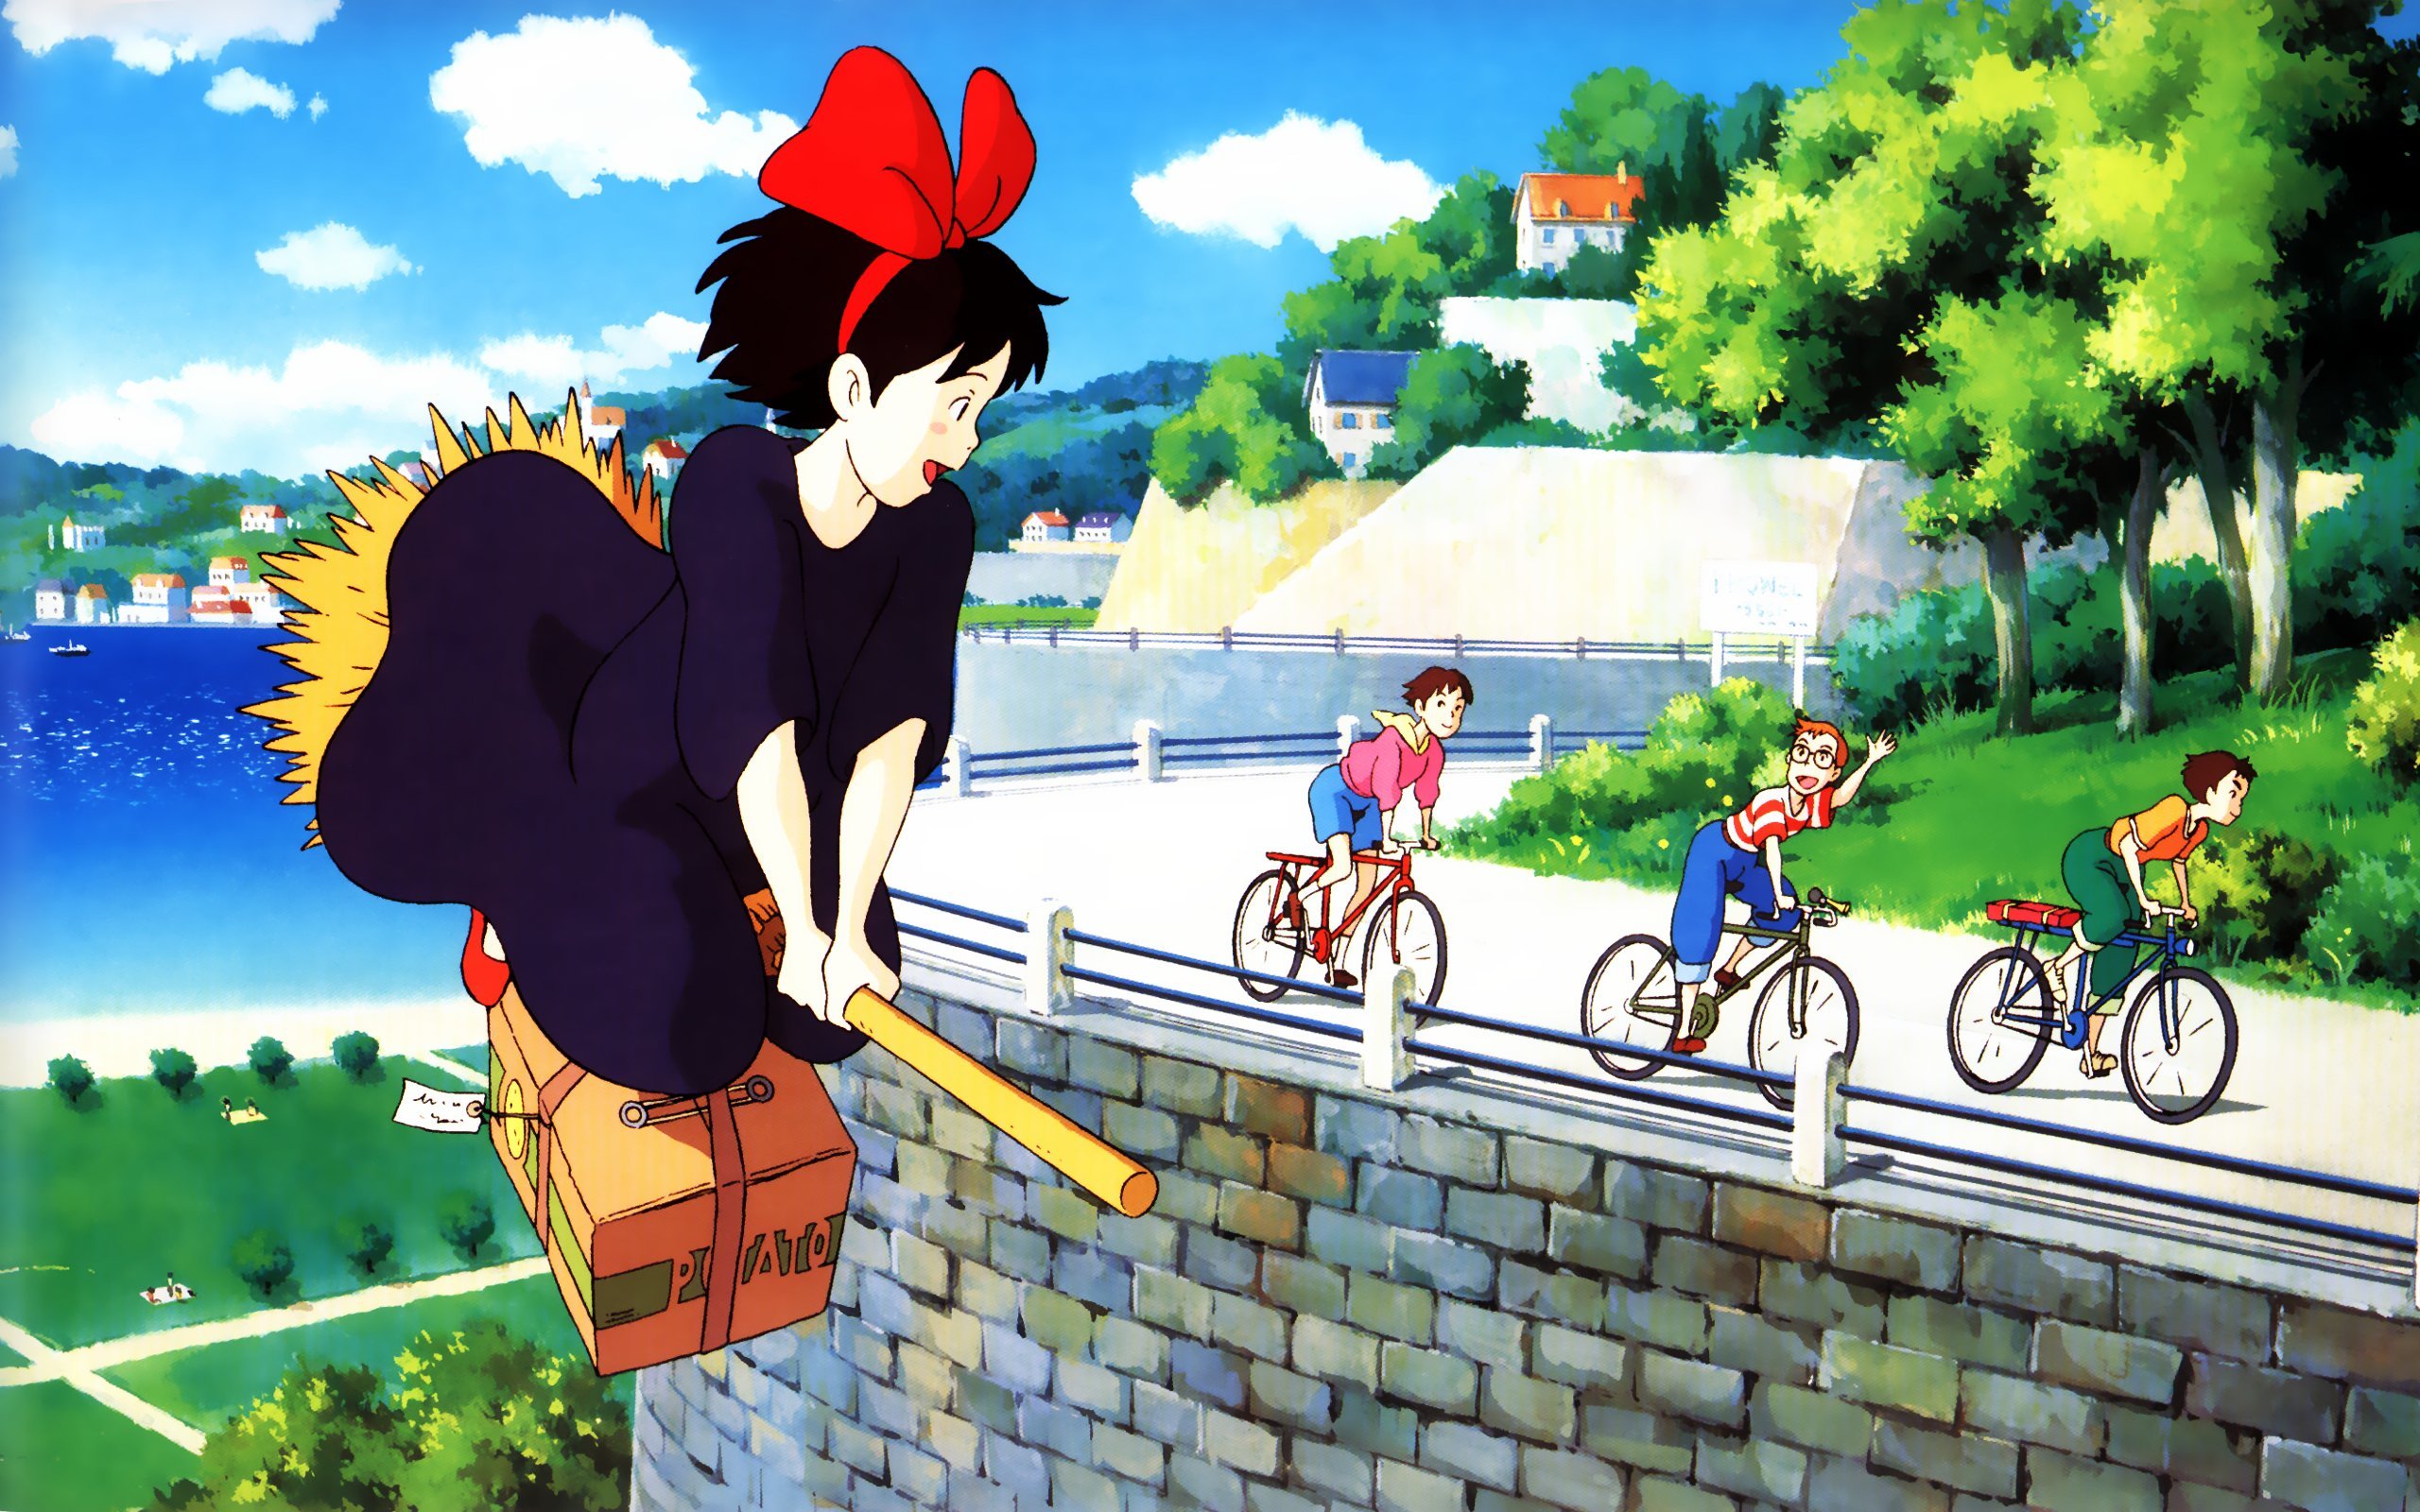 Kiki's Delivery Service wallpapers HD for desktop backgrounds.